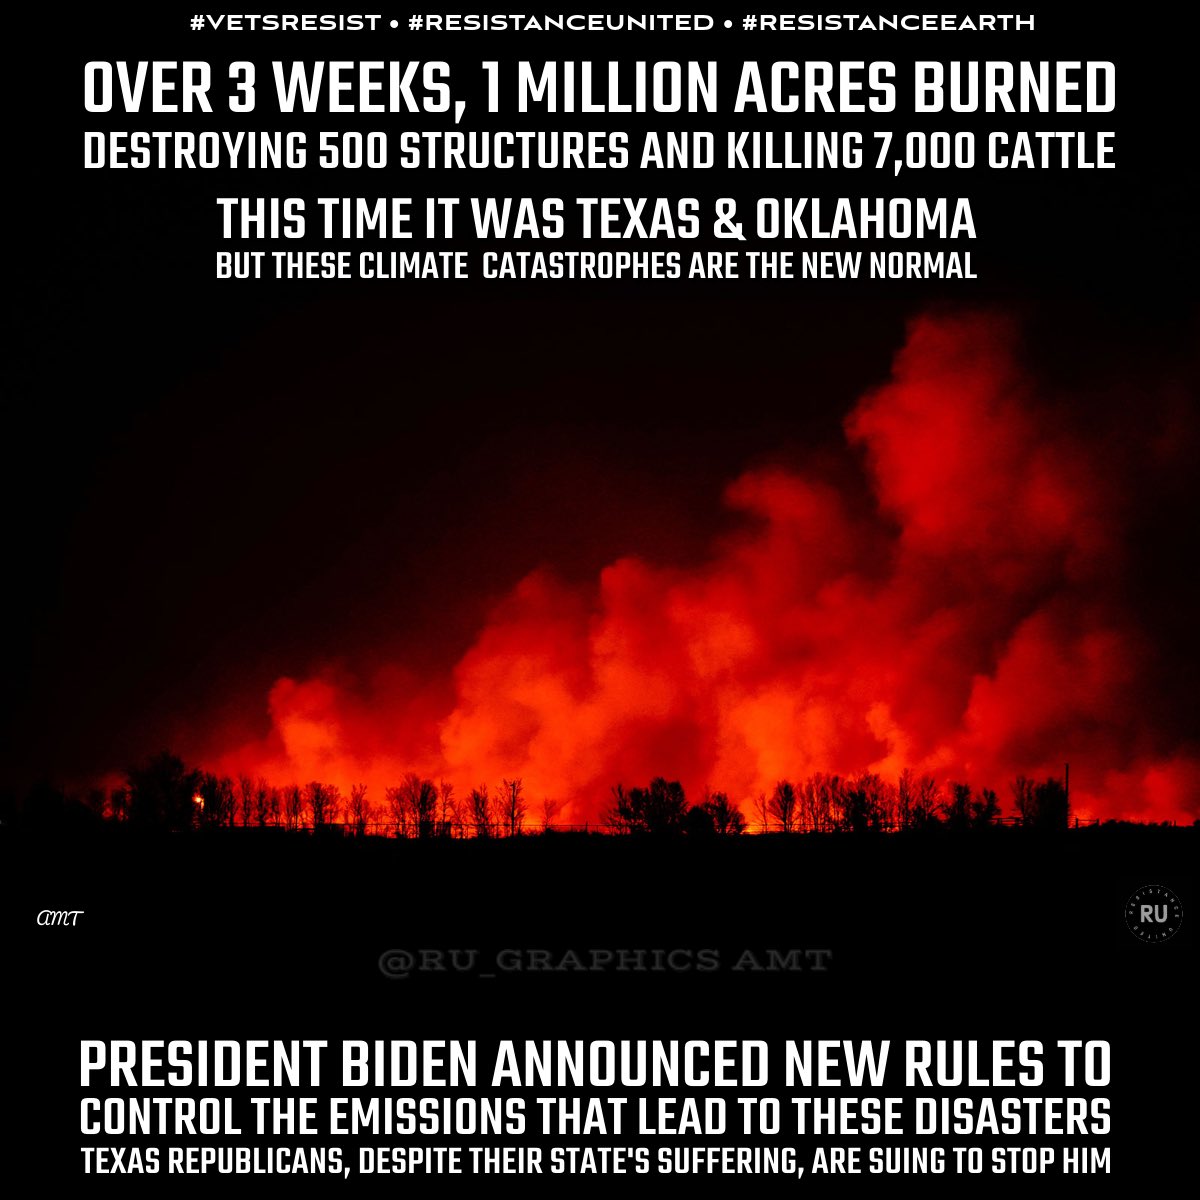 #ResistanceUnited #ResistancEarth 2 lives. 7,000 cattle, 500 Bldgs & 1M acres These are the costs of Smokehouse Creek Fire Biden Admin announced rules to curb emissions that caused it so of course TX Rep are suing to🛑him They care more about the oil & gas than their ppl or🌎